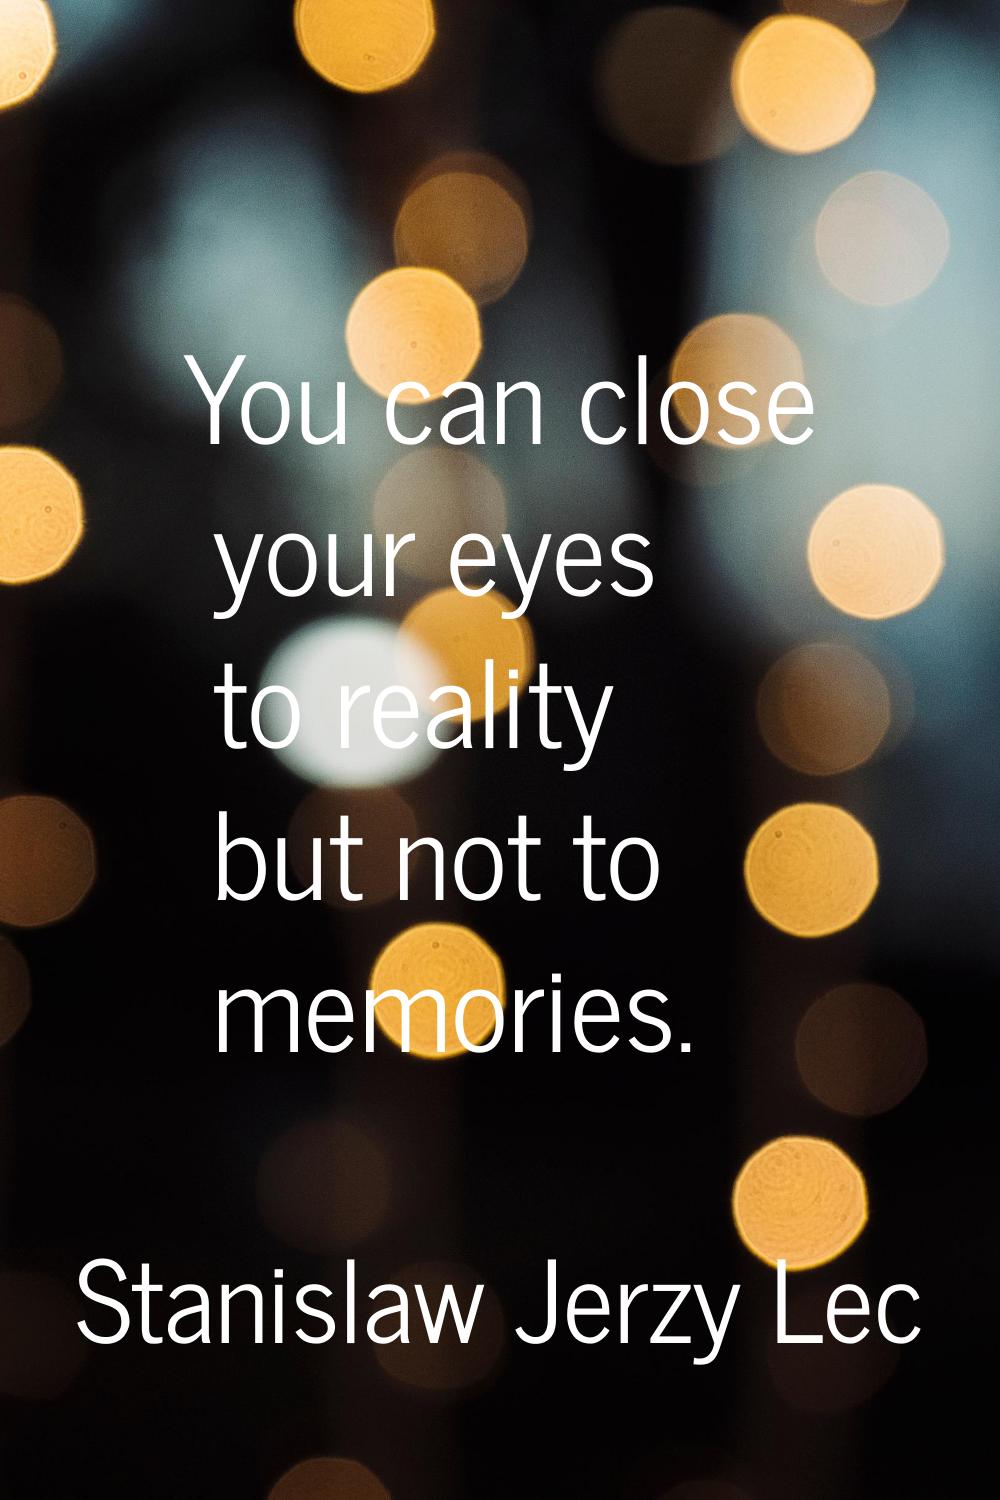 You can close your eyes to reality but not to memories.